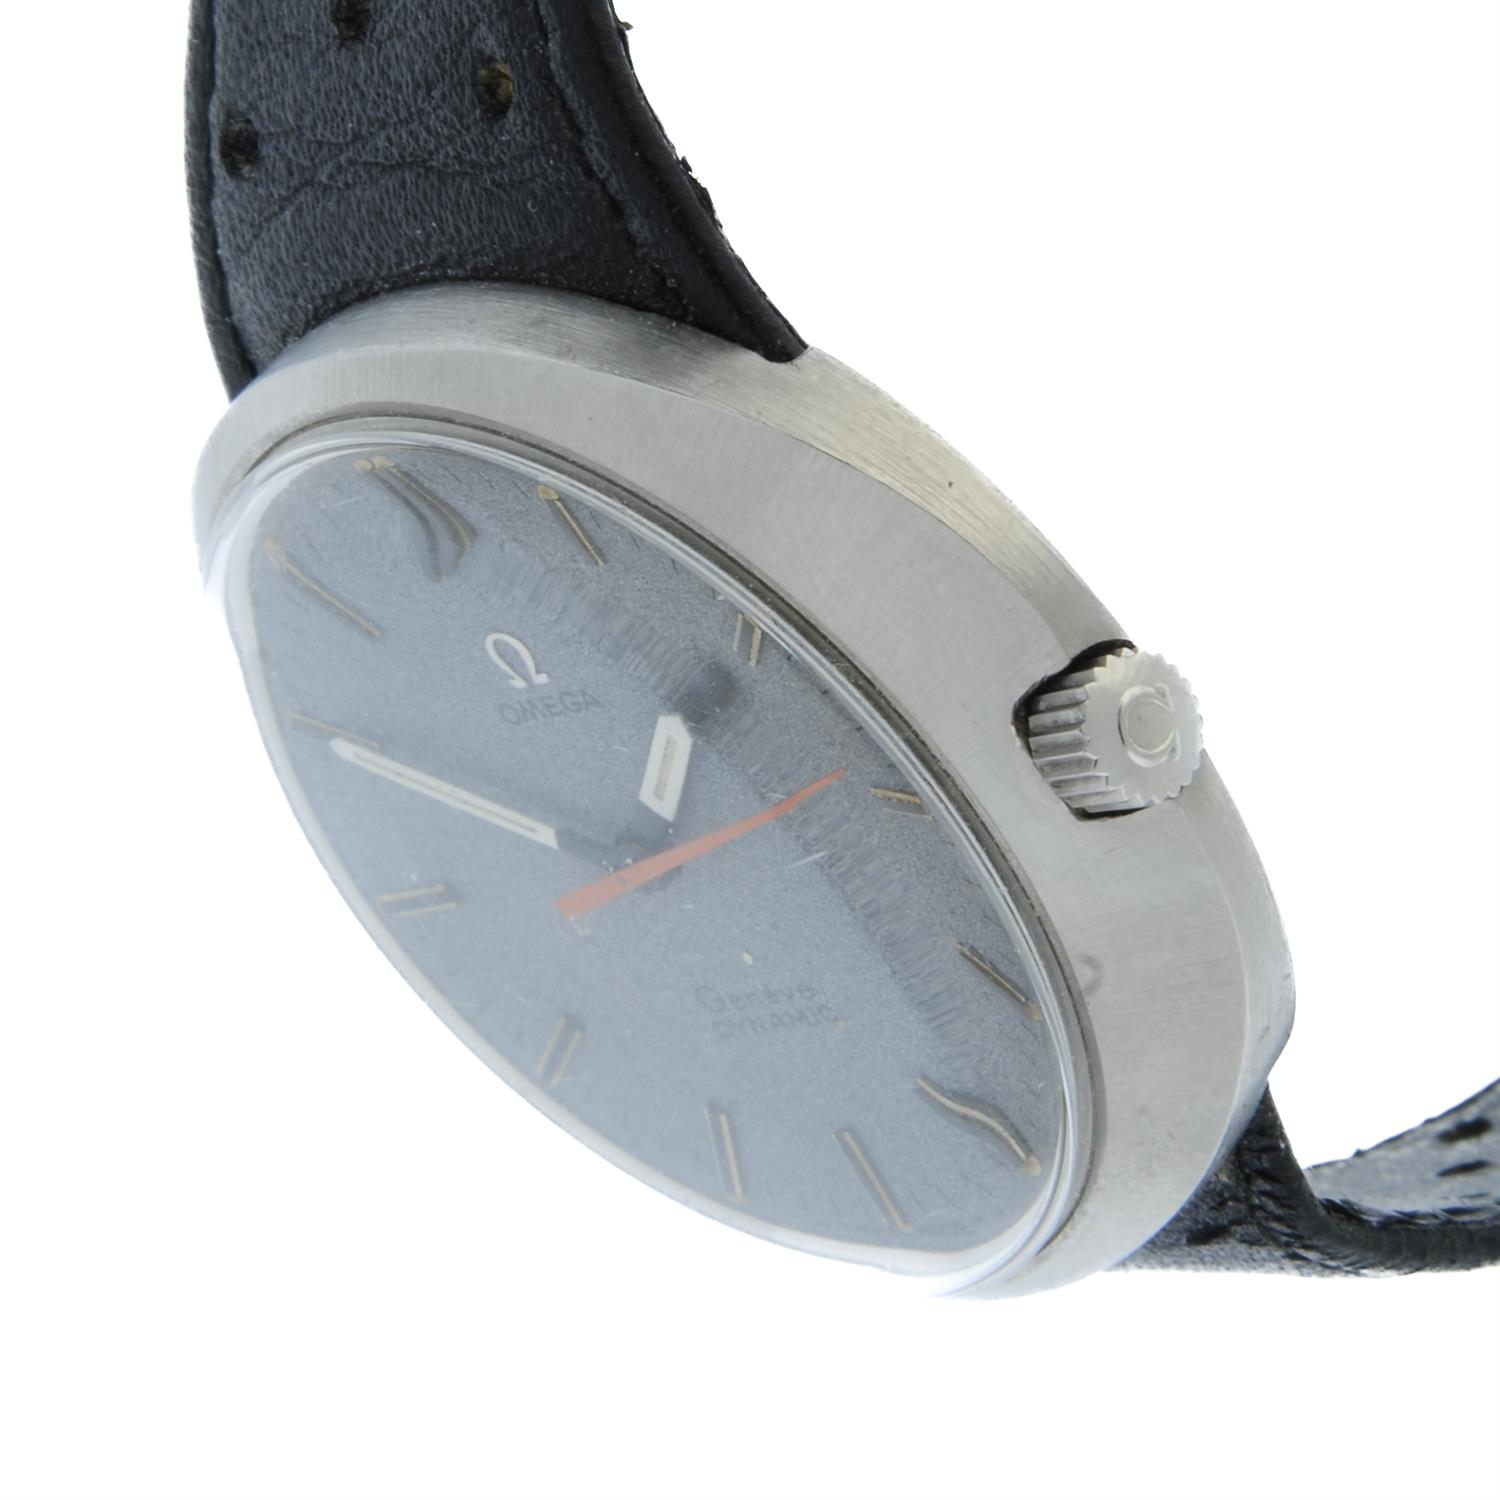 Omega - a Dynamic watch, 41mm. - Image 3 of 4